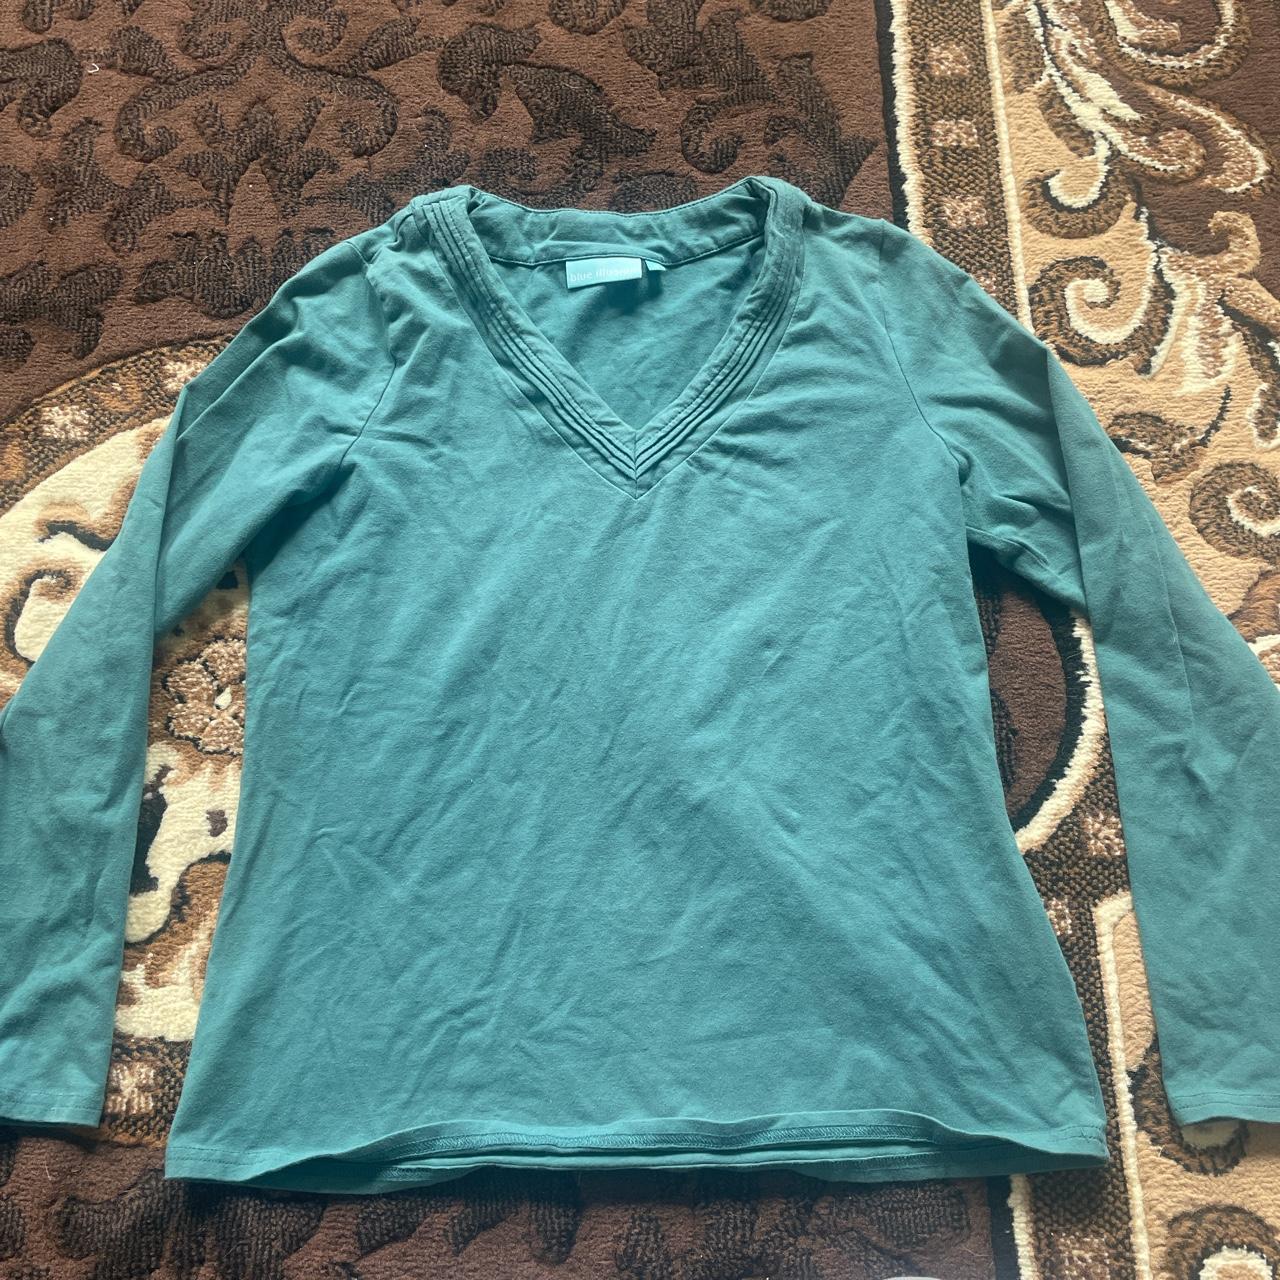 Blue Illusion Women's Blue and Green Shirt